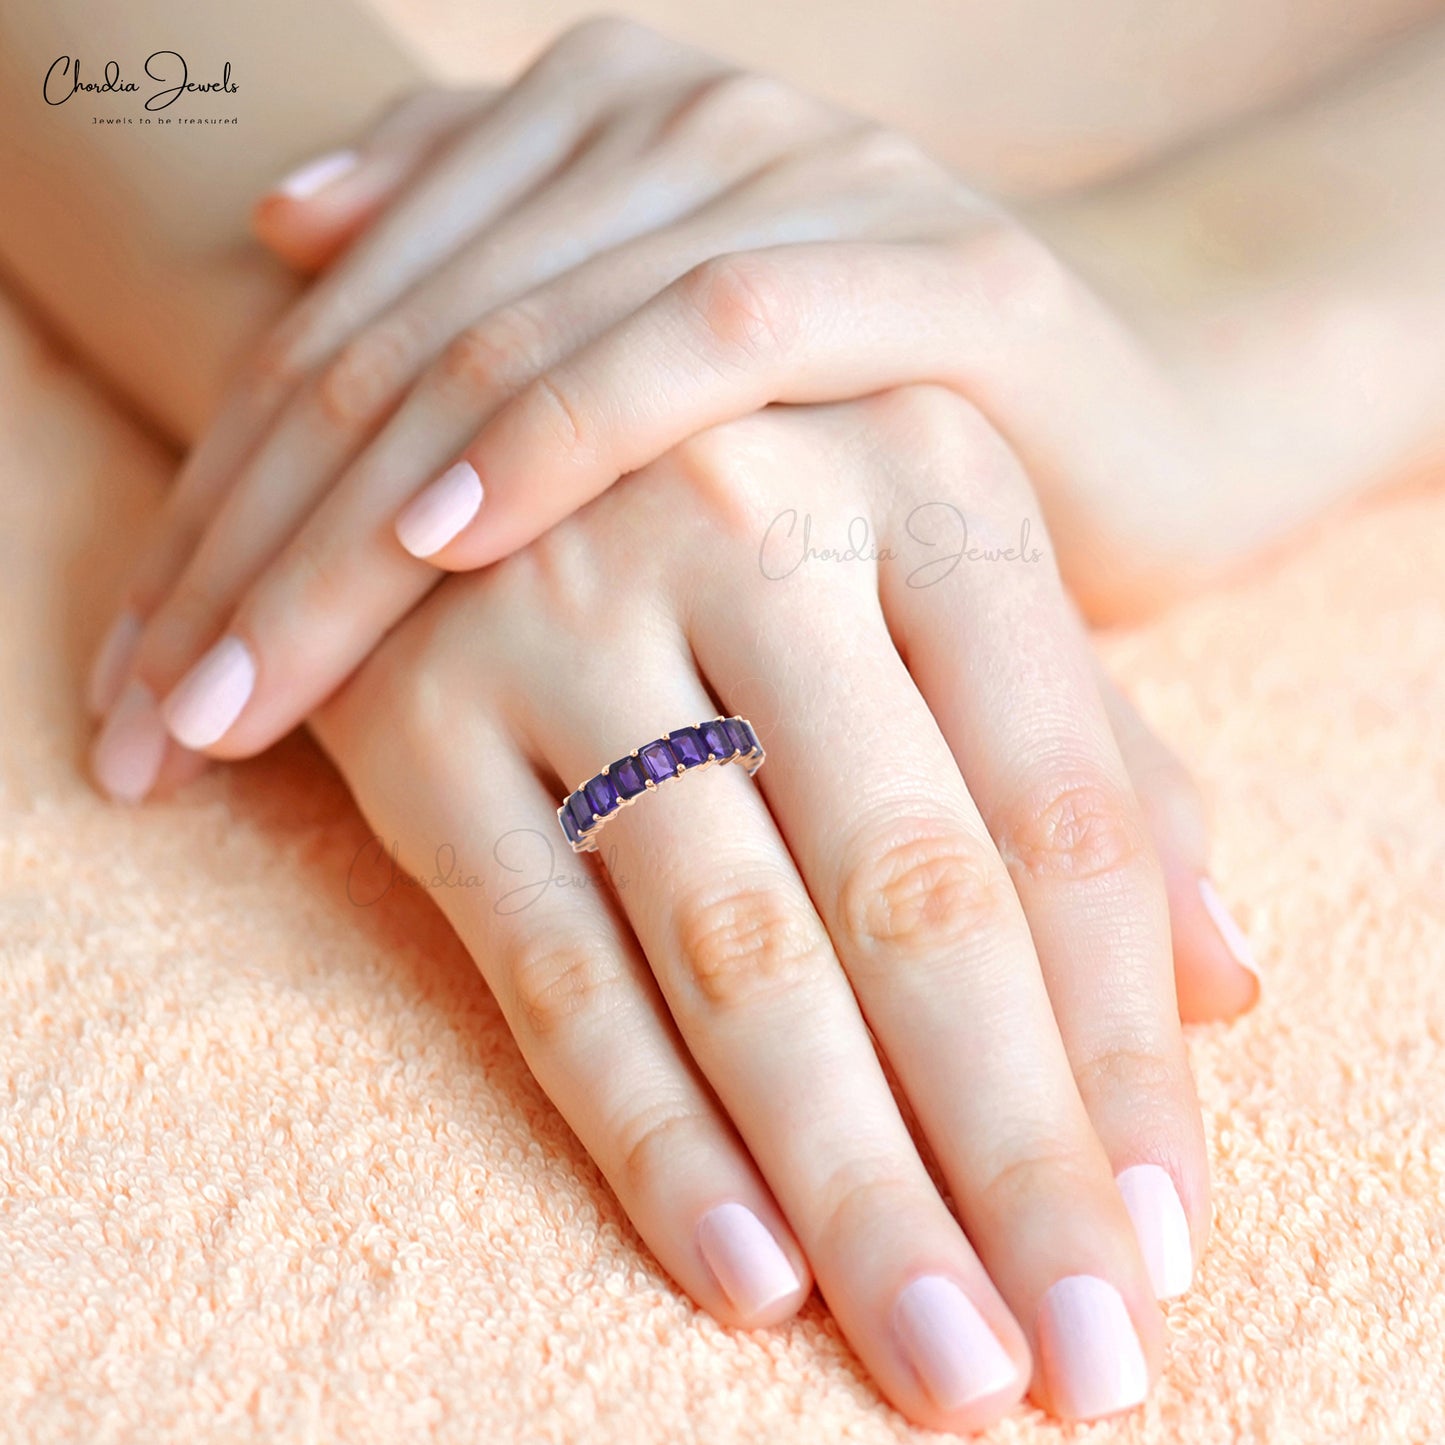 Full Eternity Amethyst Ring In 925 Sterling Silver Stacking Gemstone Jewelry From Trustable Supplier At Offer Price